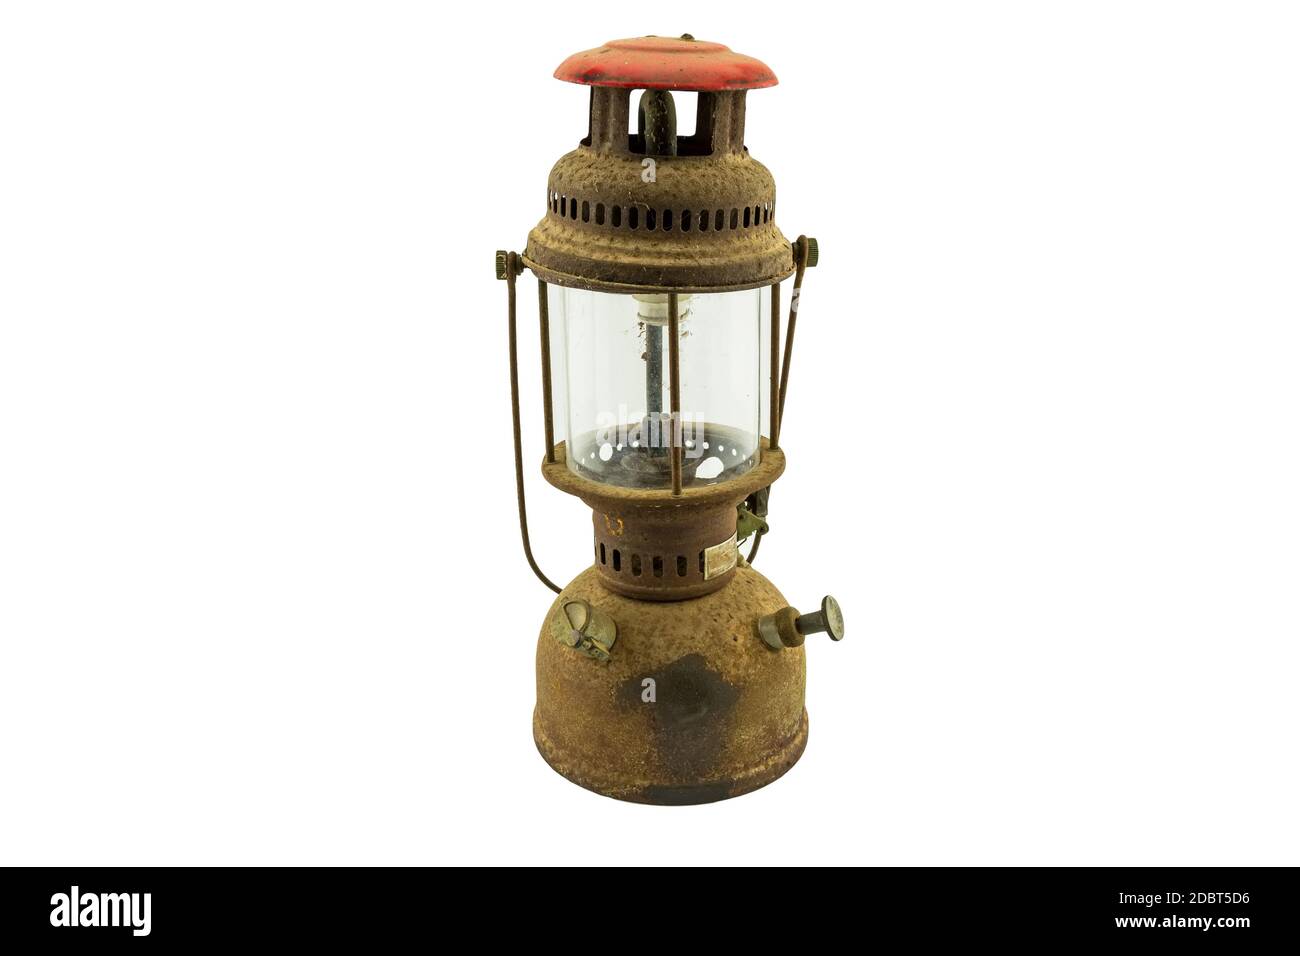 Old classic dusty oil lamp isolated on white background Stock Photo